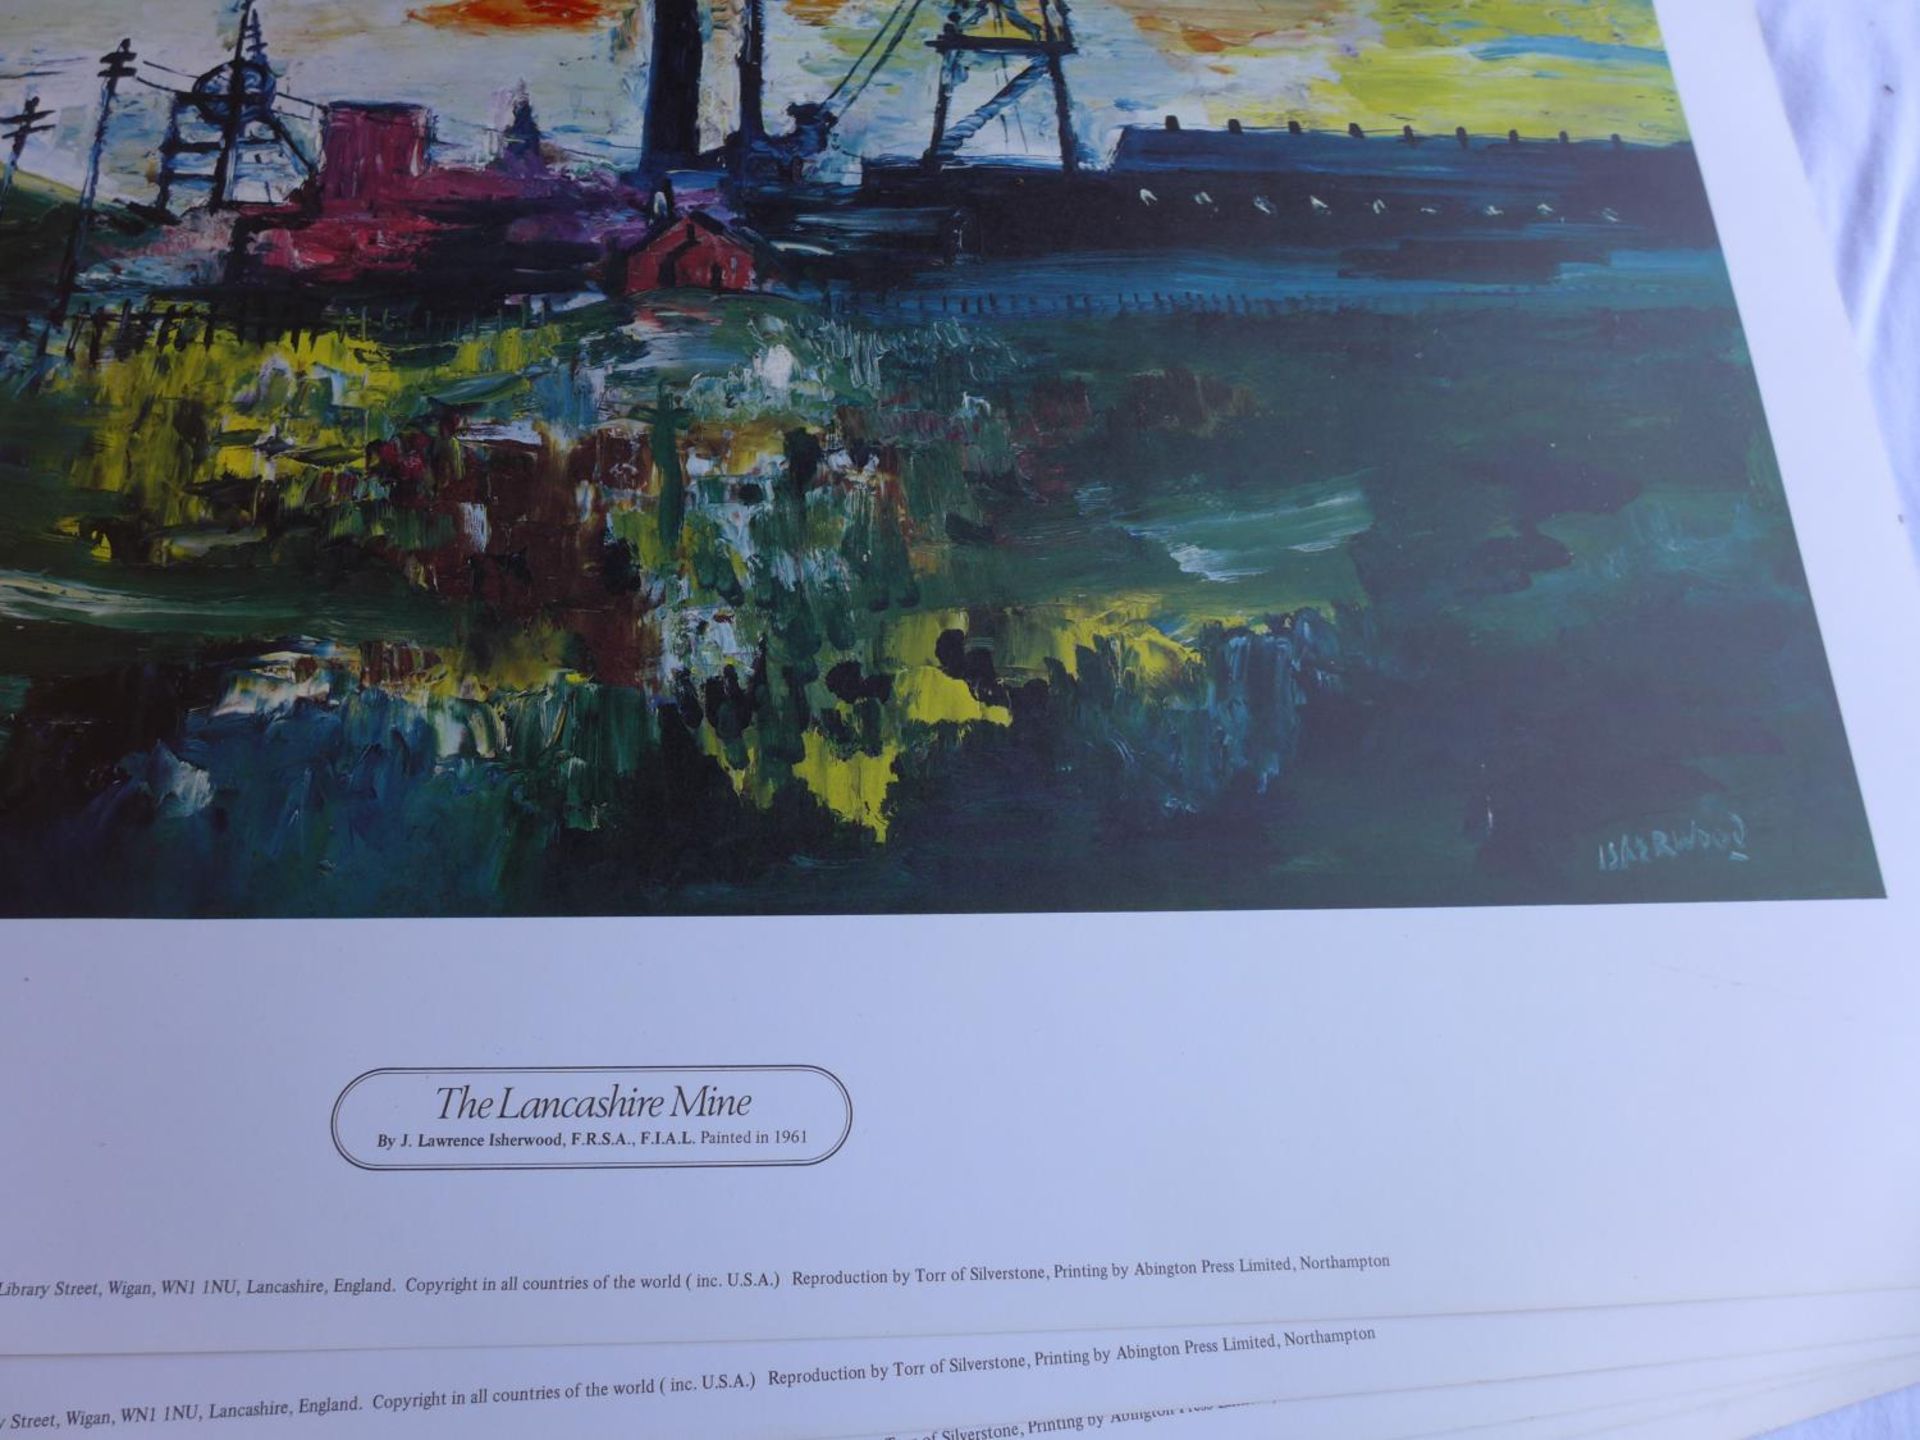 JAMES LAWRENCE ISHERWOOD - FIVE COLOURED PRINTS OF "THE LANCASHIRE MINE", EACH 40X60CM, PRINT WITH - Image 3 of 6